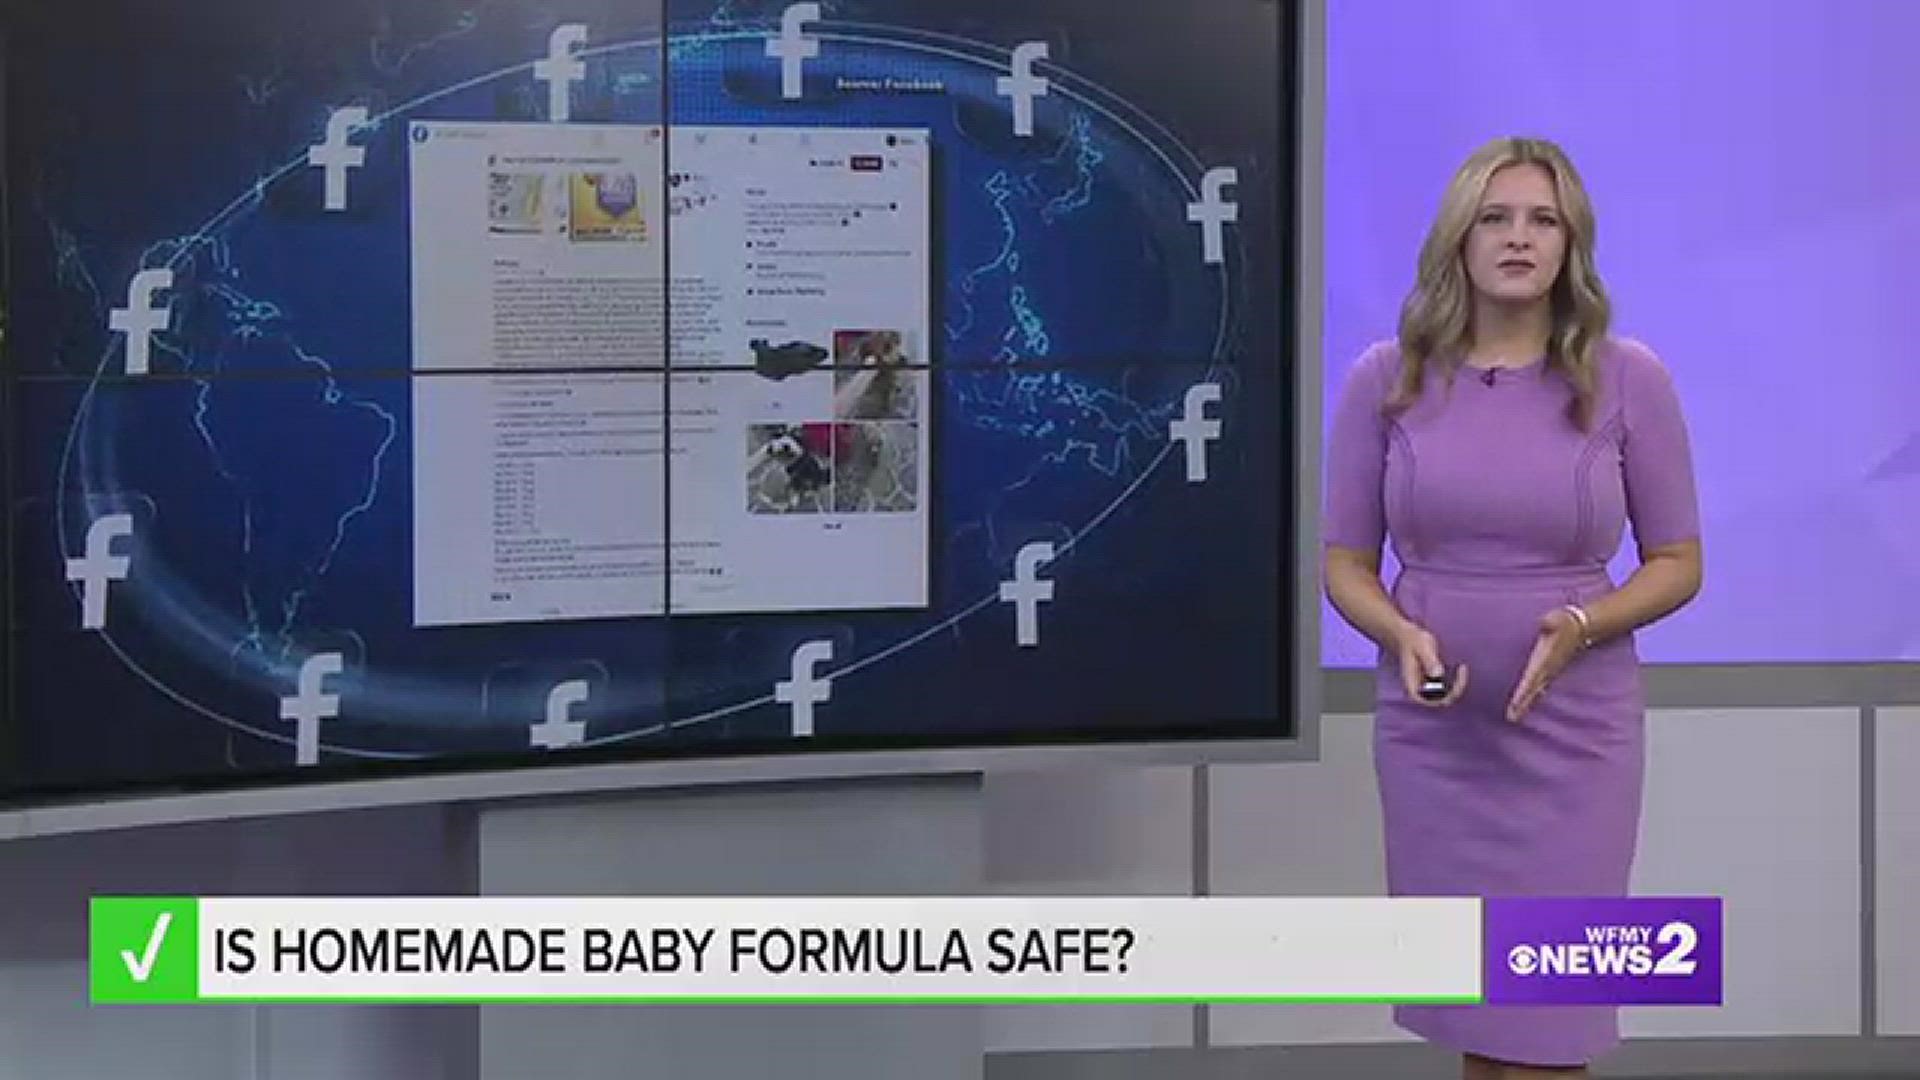 WFMY verified that homemade infant formula is not safe for babies.